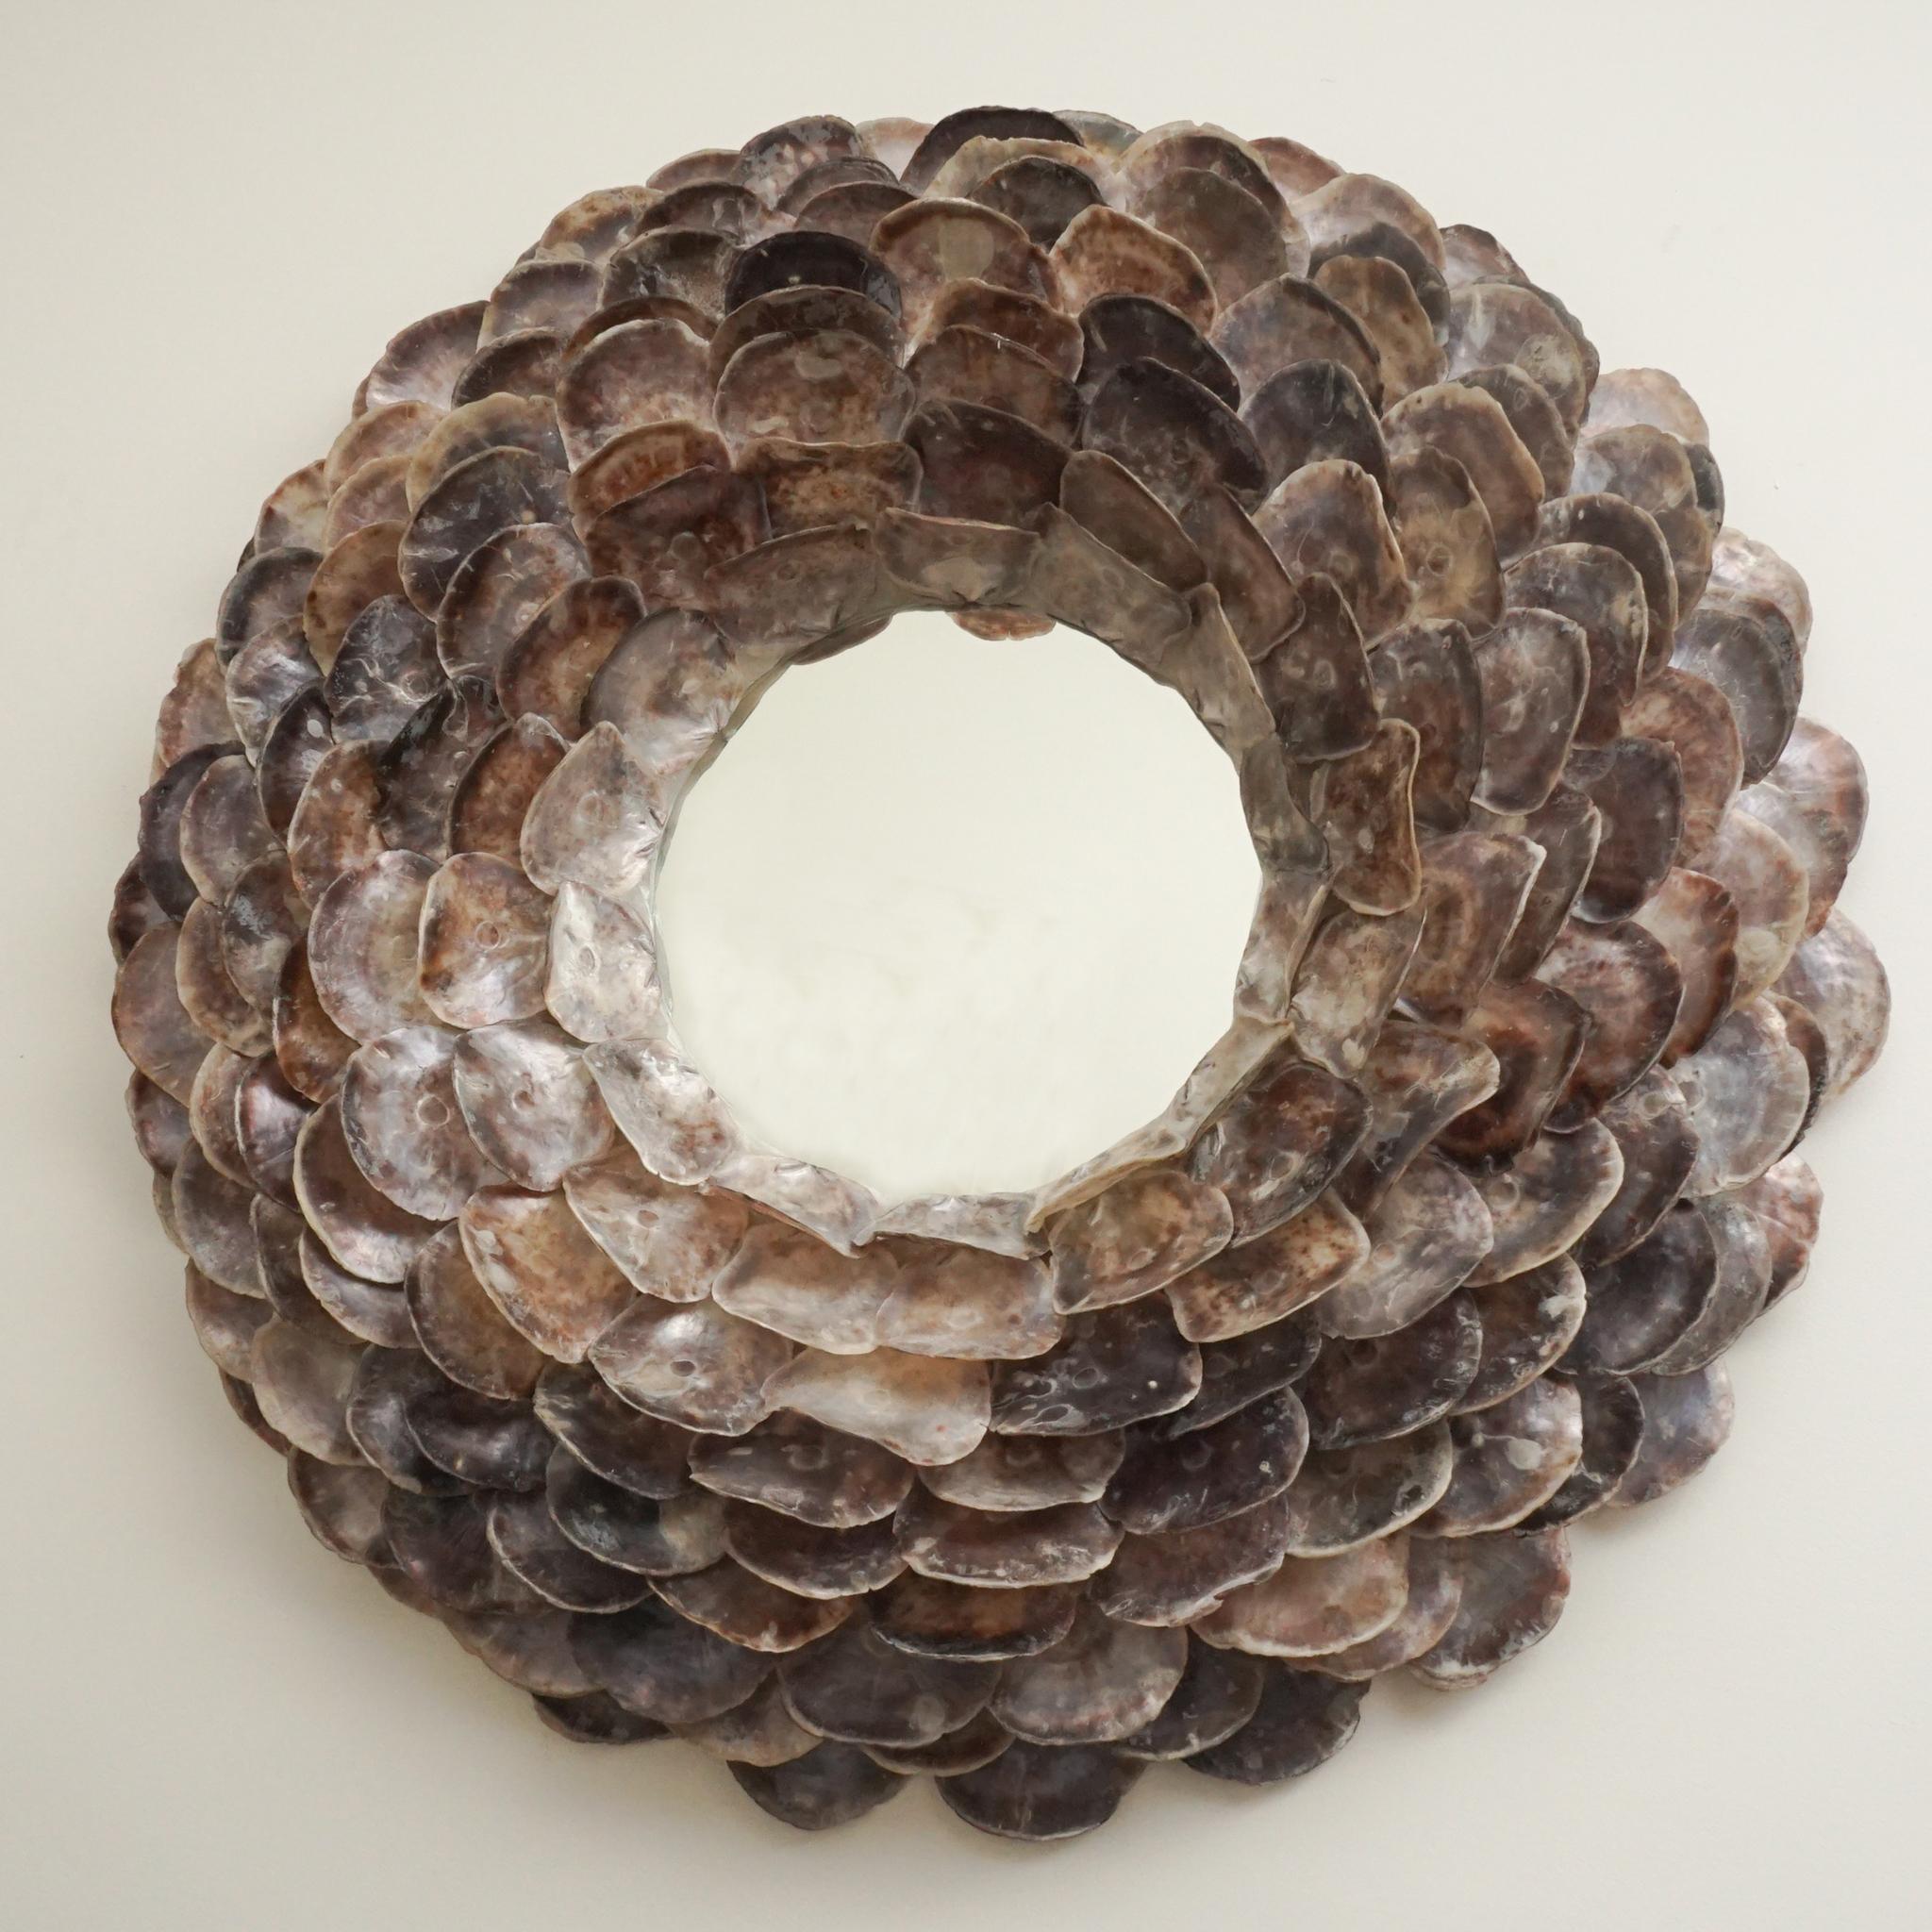 The dramatic round mirror, shown here, features oyster shells arranged as petals of a 45-inch flower.  The shells are intricately arranged in graduating sizes from small at the center to large at the mirror's edge—radiating 12